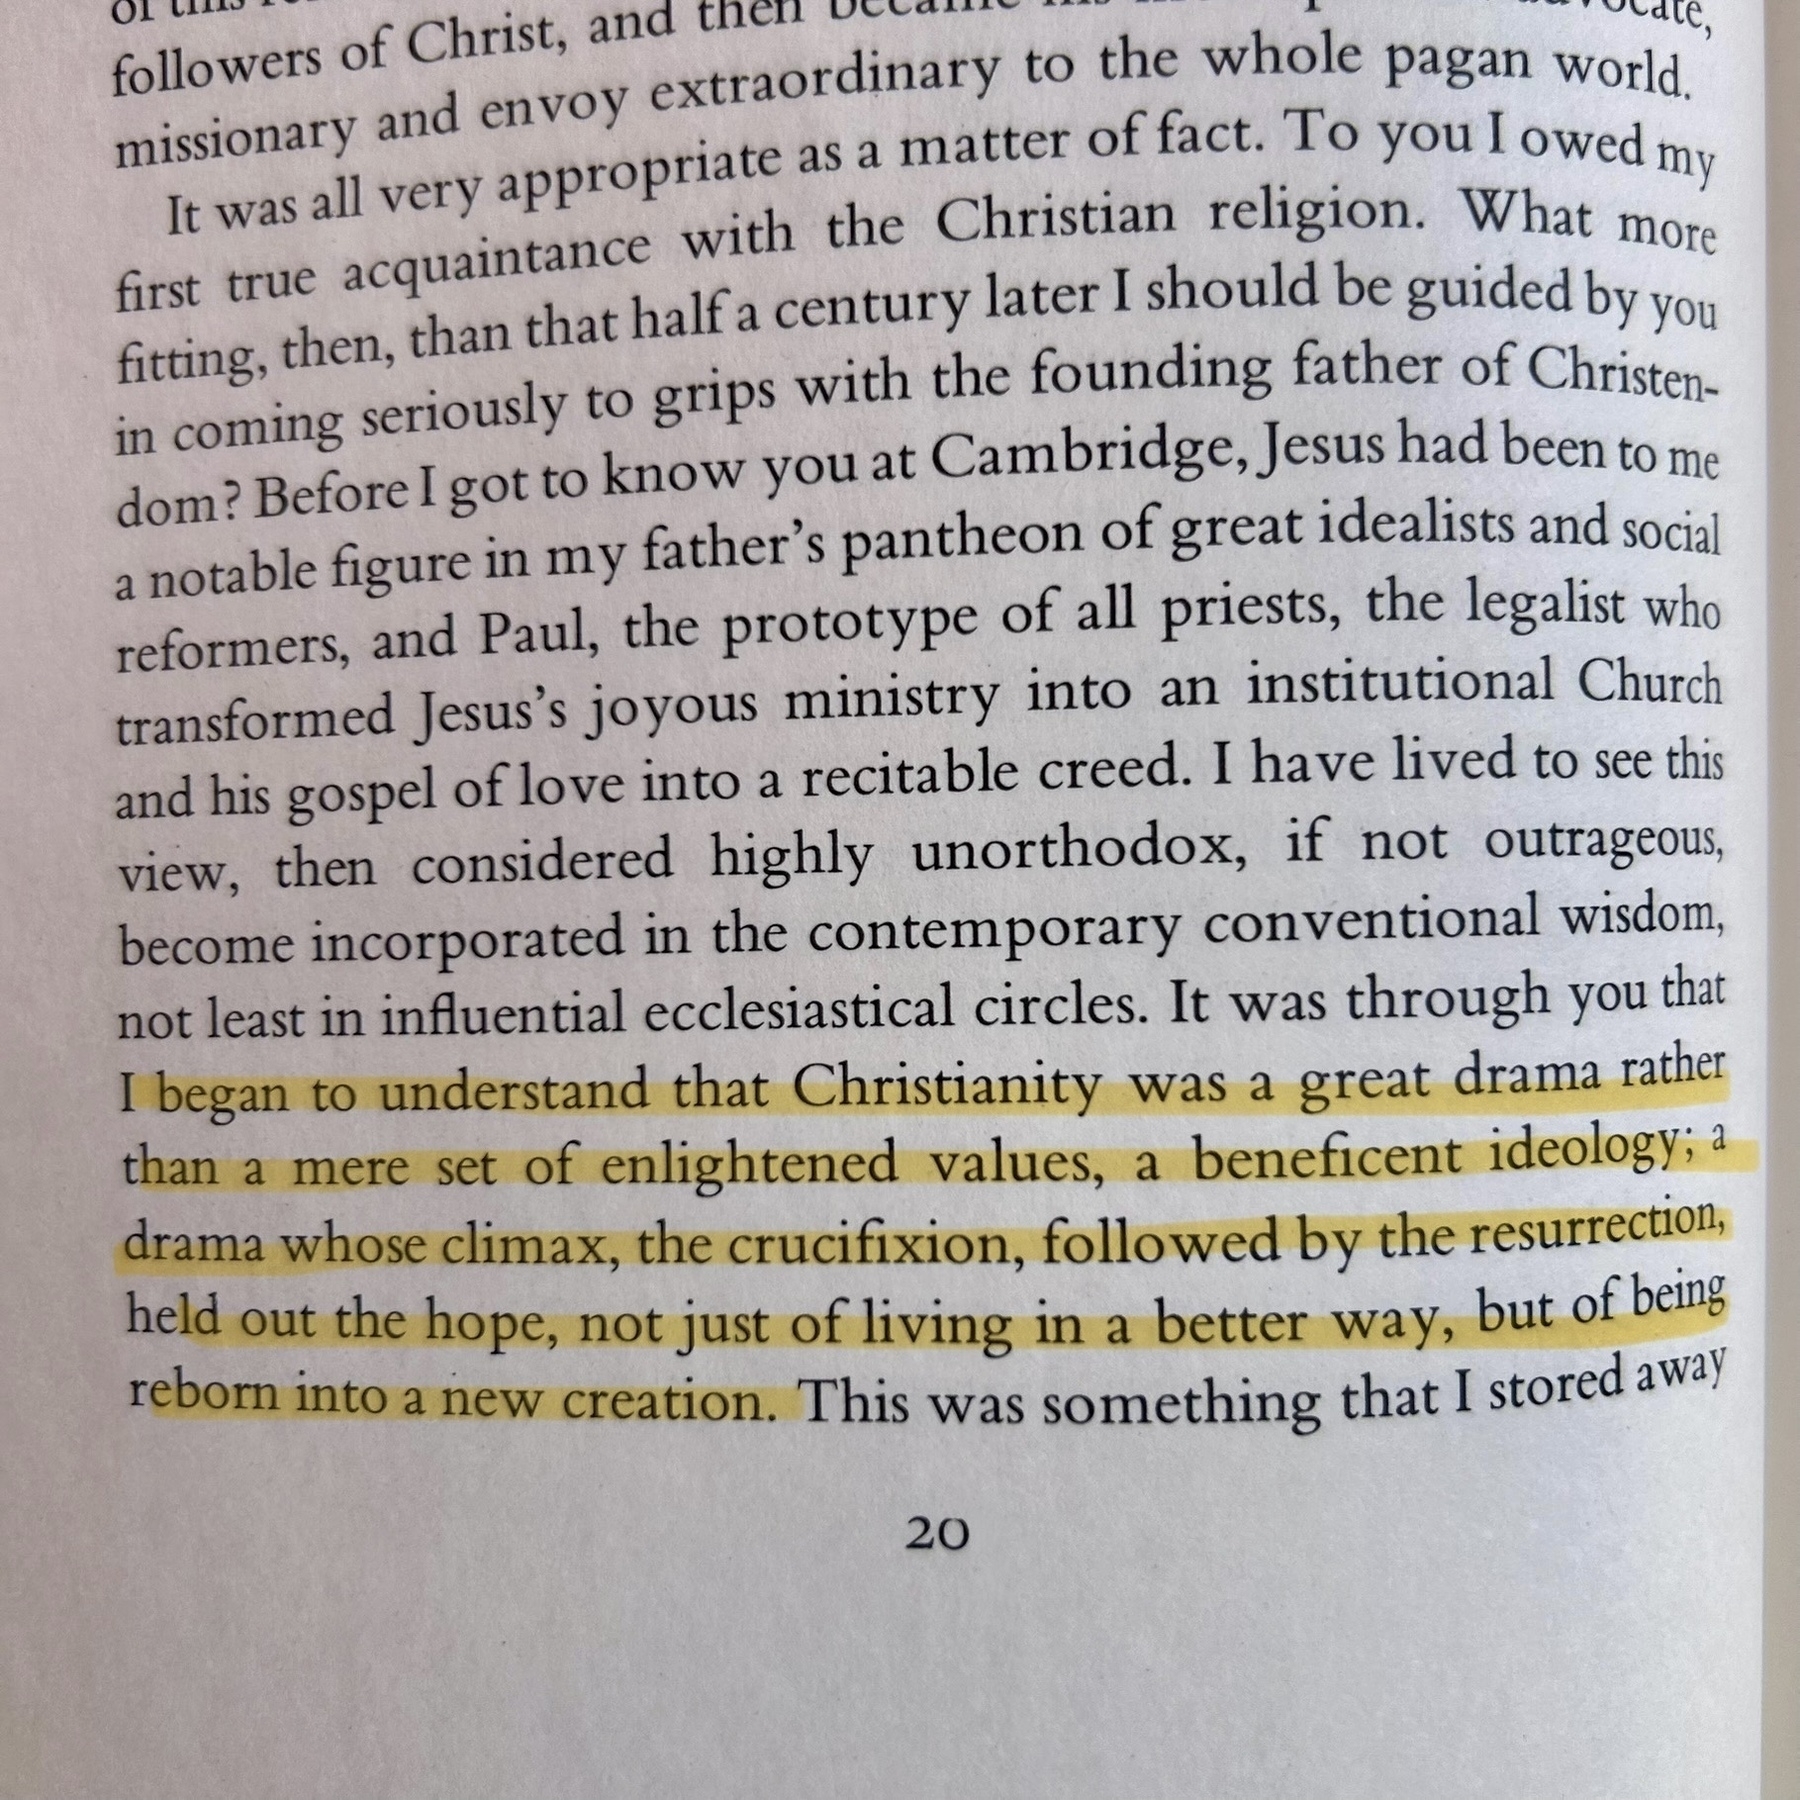 a page with the following words highlighted: I began to understand that Christianity was a great drama rather than a mere set of enlightened values, a beneficent ideology; a drama whose climax, the crucifixion, followed by the resurrection, held out the hope, not just of living in a better way, but of being reborn into a new creation.